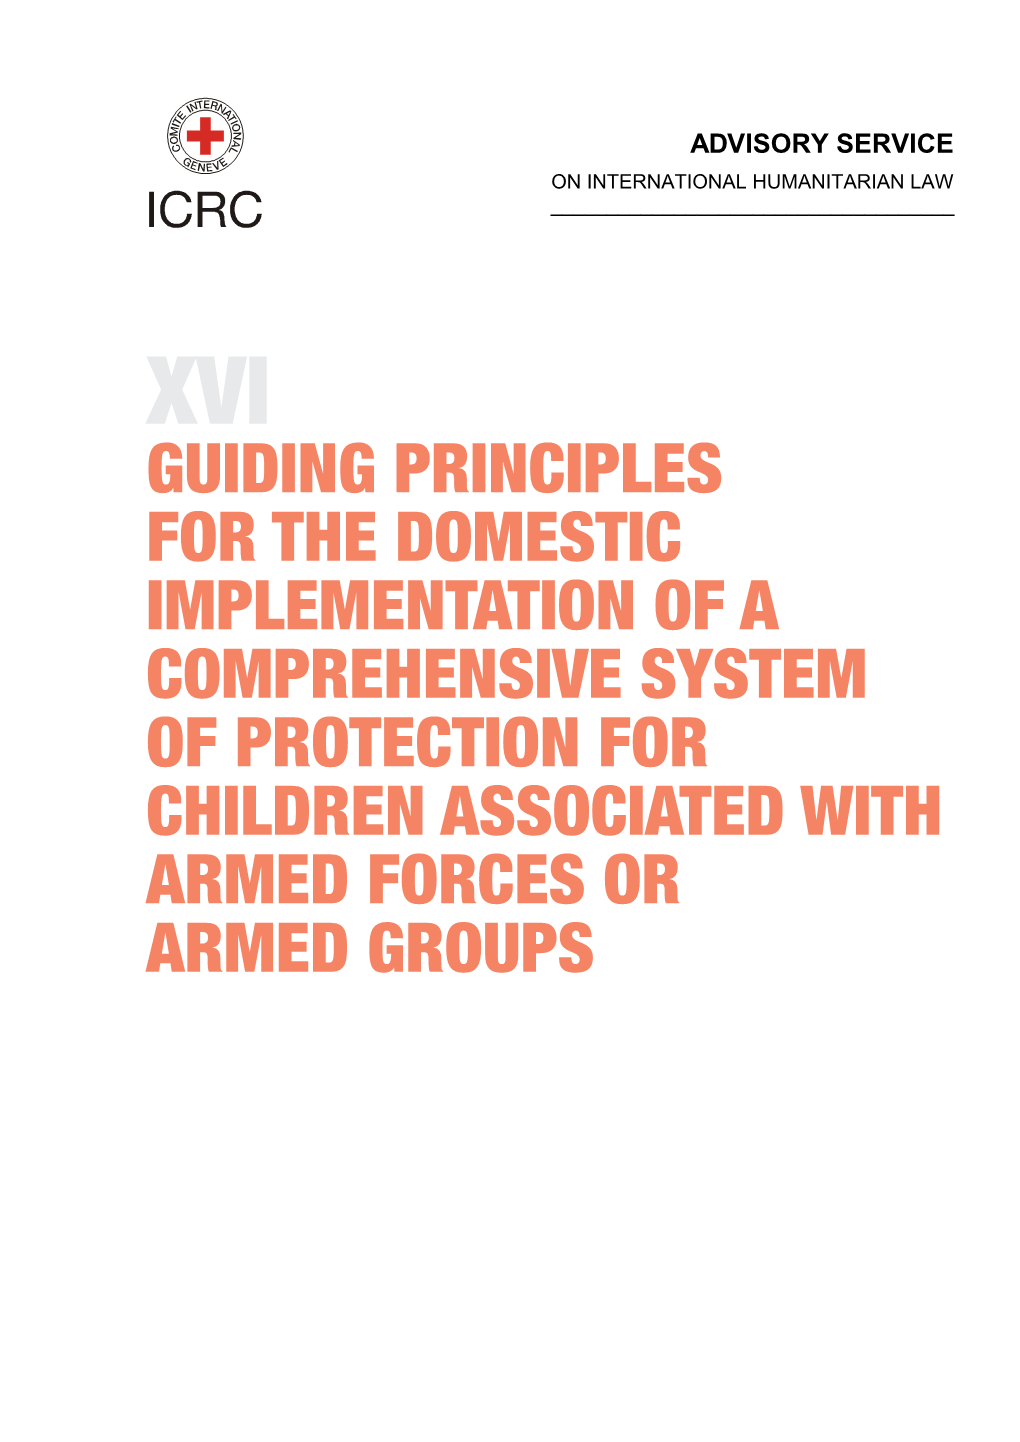 Guiding Principles for the Domestic Implementation of A